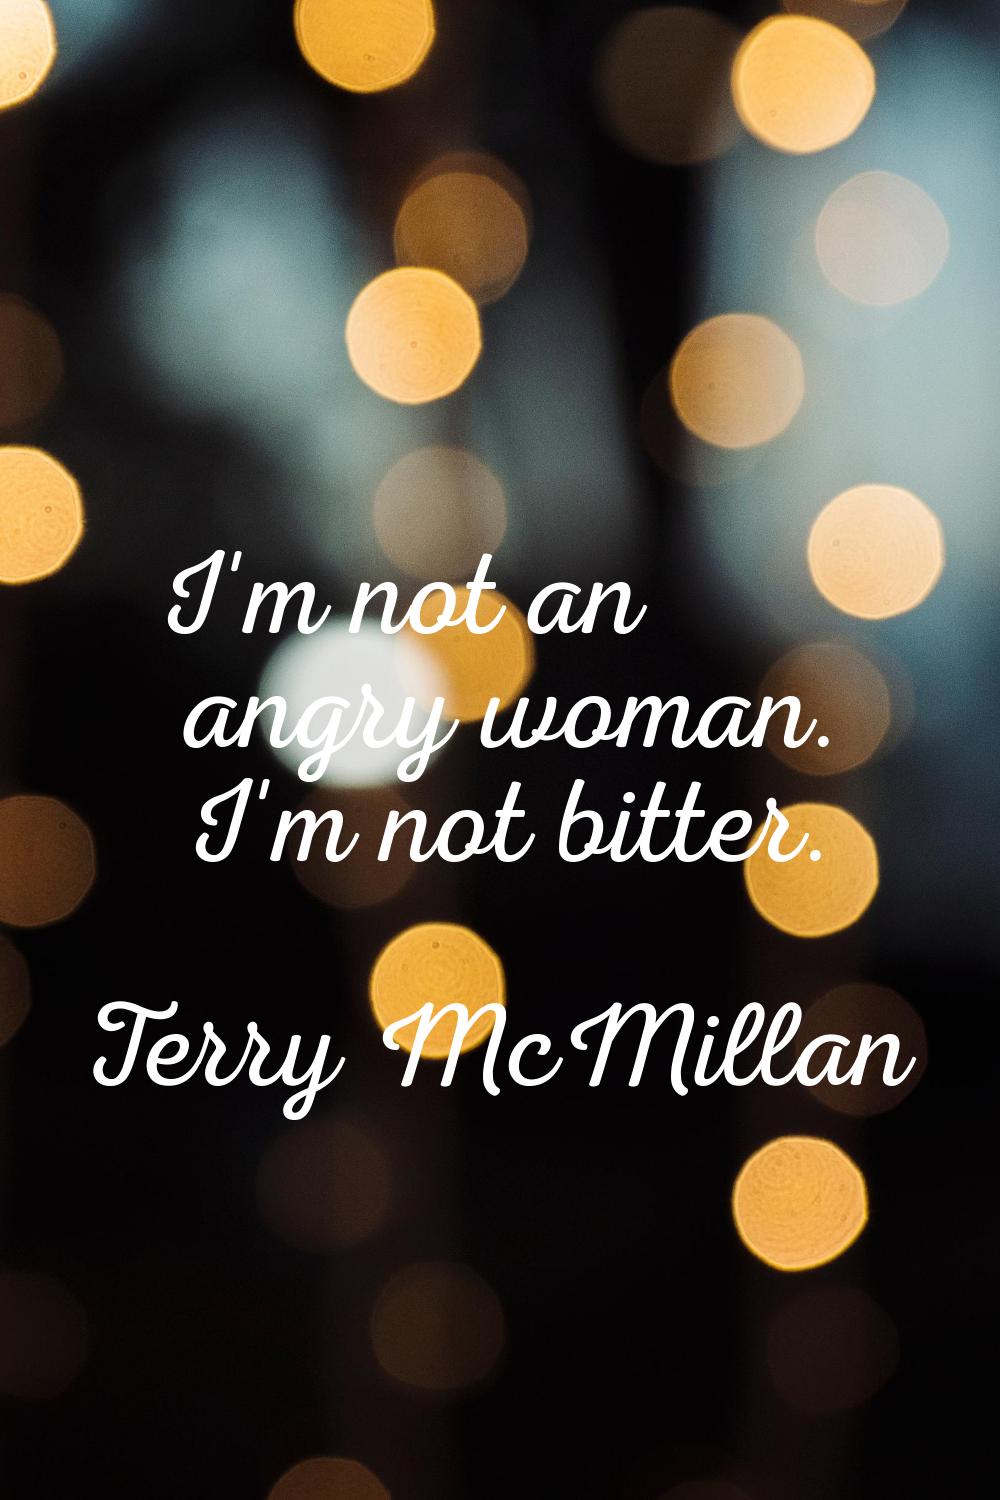 I'm not an angry woman. I'm not bitter.